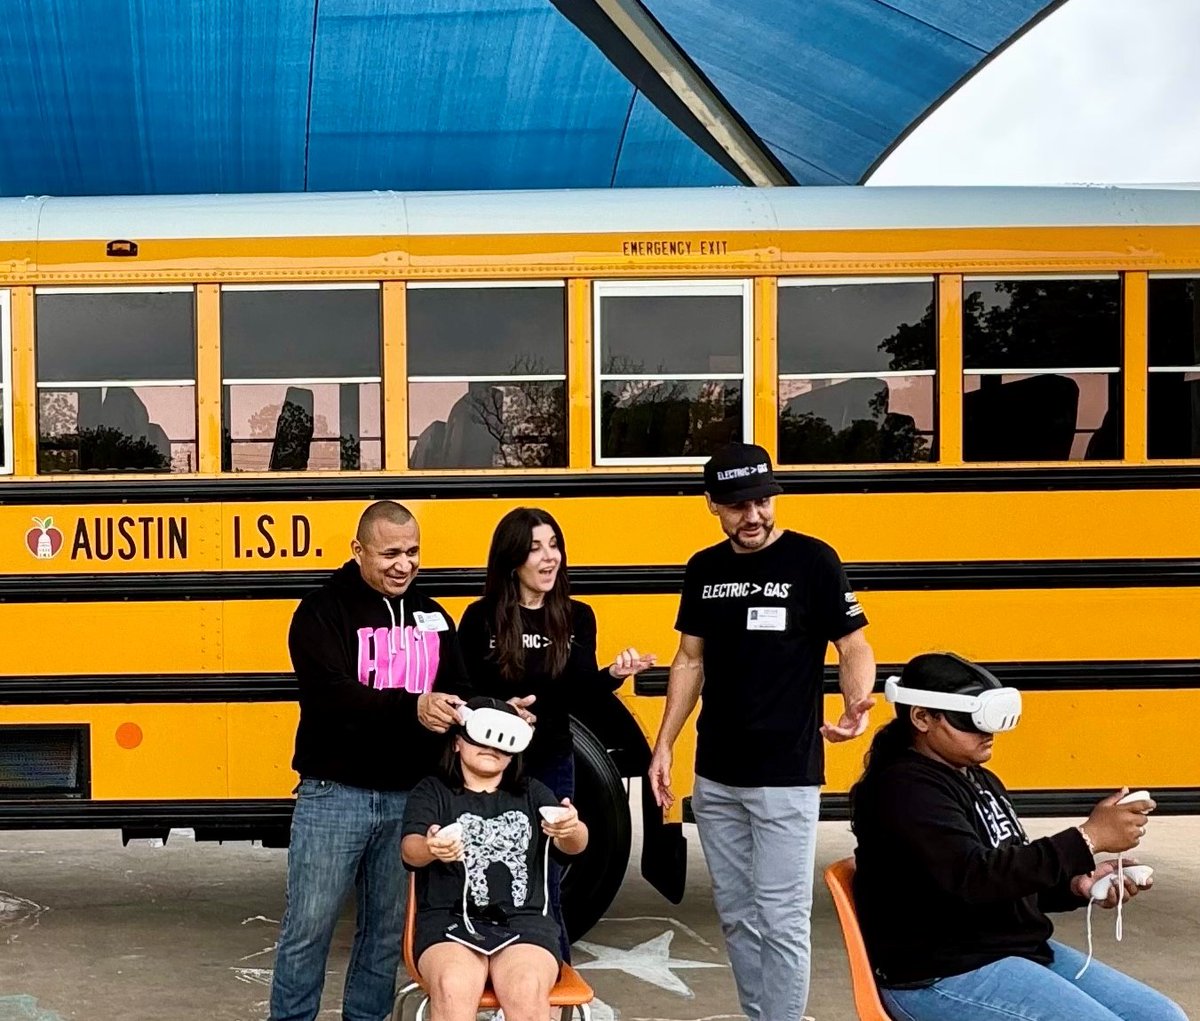 Our Electric Vehicles team had a fantastic visit w/ St. Elmo Elementary as part of our EVs For Schools program! ⚡️

Students toured a new @AustinISD electric school bus, experienced EV virtual reality & learned about the benefits of going electric, such as pollution reduction.